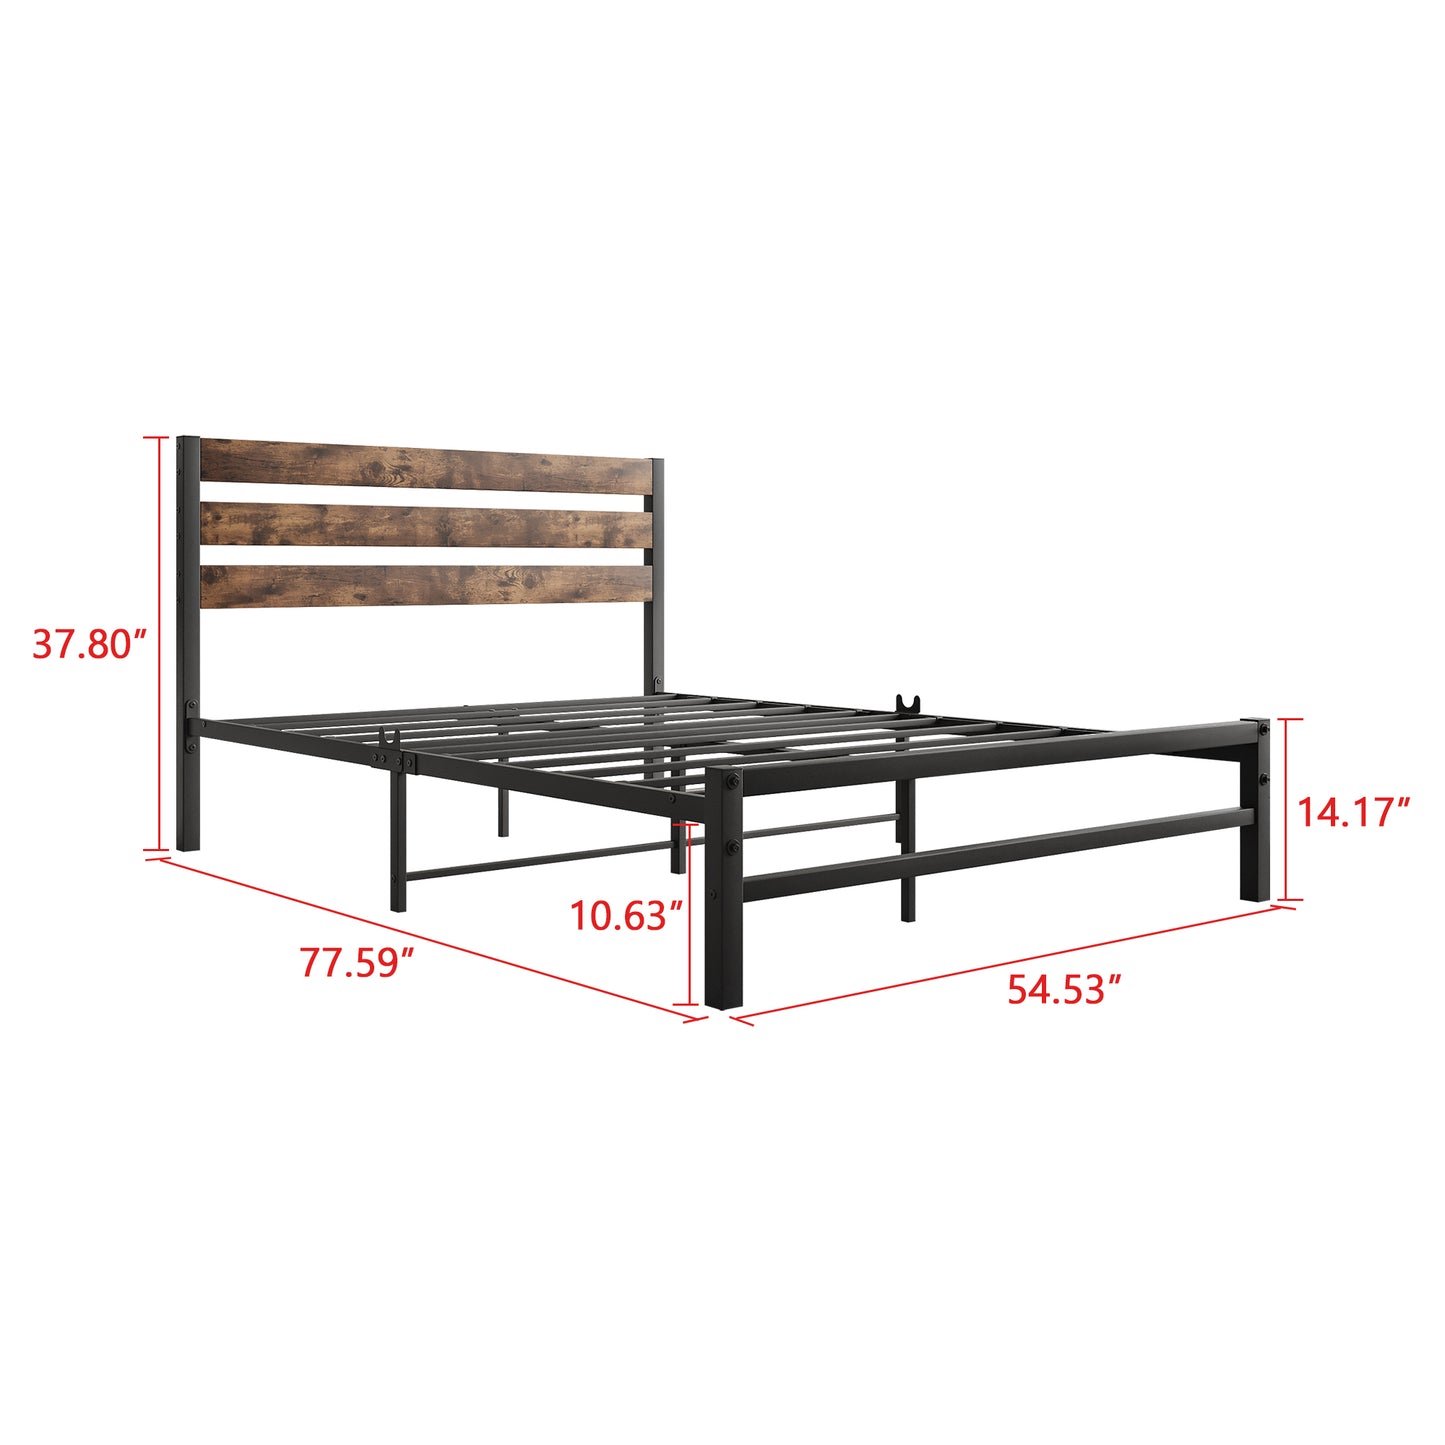 SYNGAR Platform Bed Frame Twin Size with Vintage Wooden Headboard, New Upgraded Metal Legs Support, No Box Spring Needed, Heavy Duty Steel Twin Bed Frame with 300LBS Weight Capacity, Black